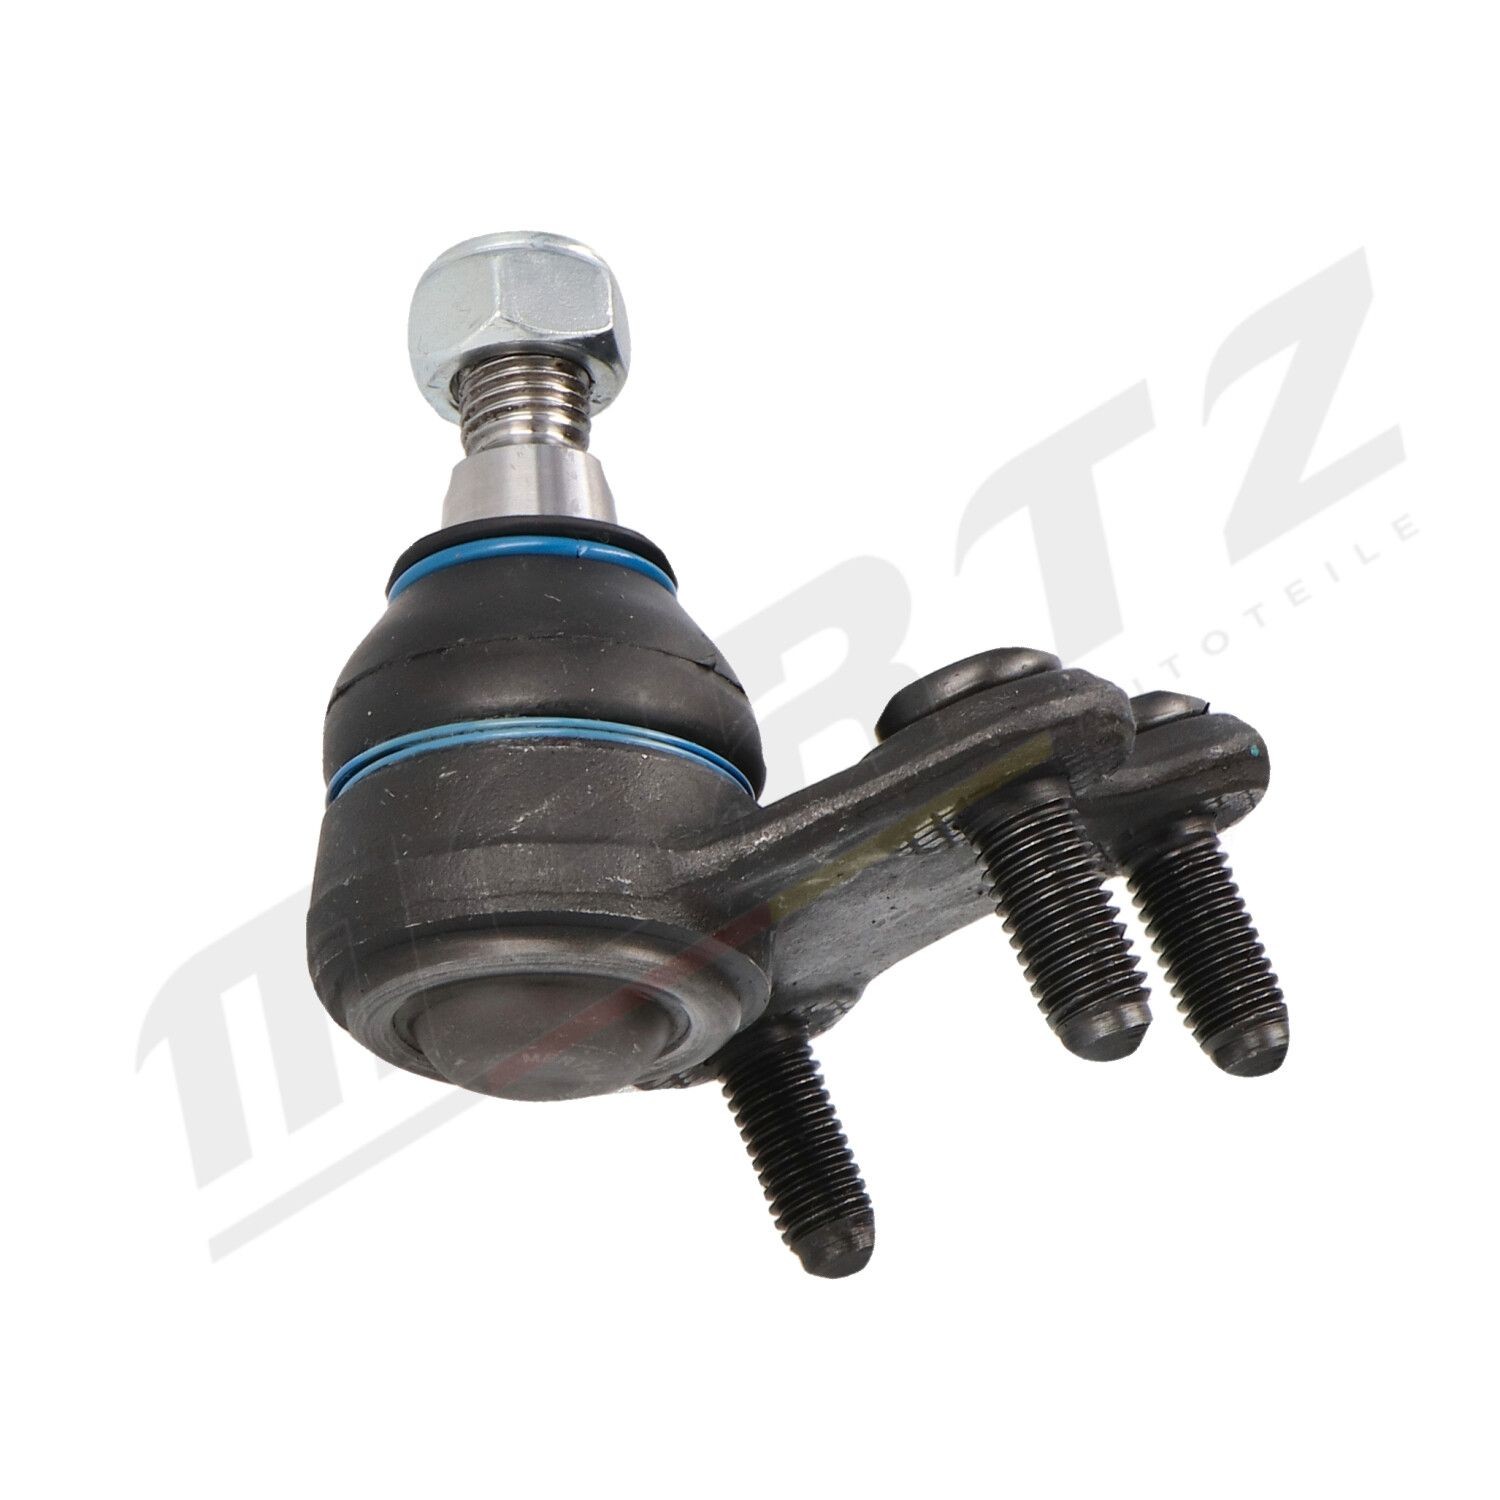 M-S0872 Suspension ball joint M-S0872 MERTZ Front Axle Right, with nut, with bolts/screws, 4,9mm, M12x1,5, M10x1,5mm